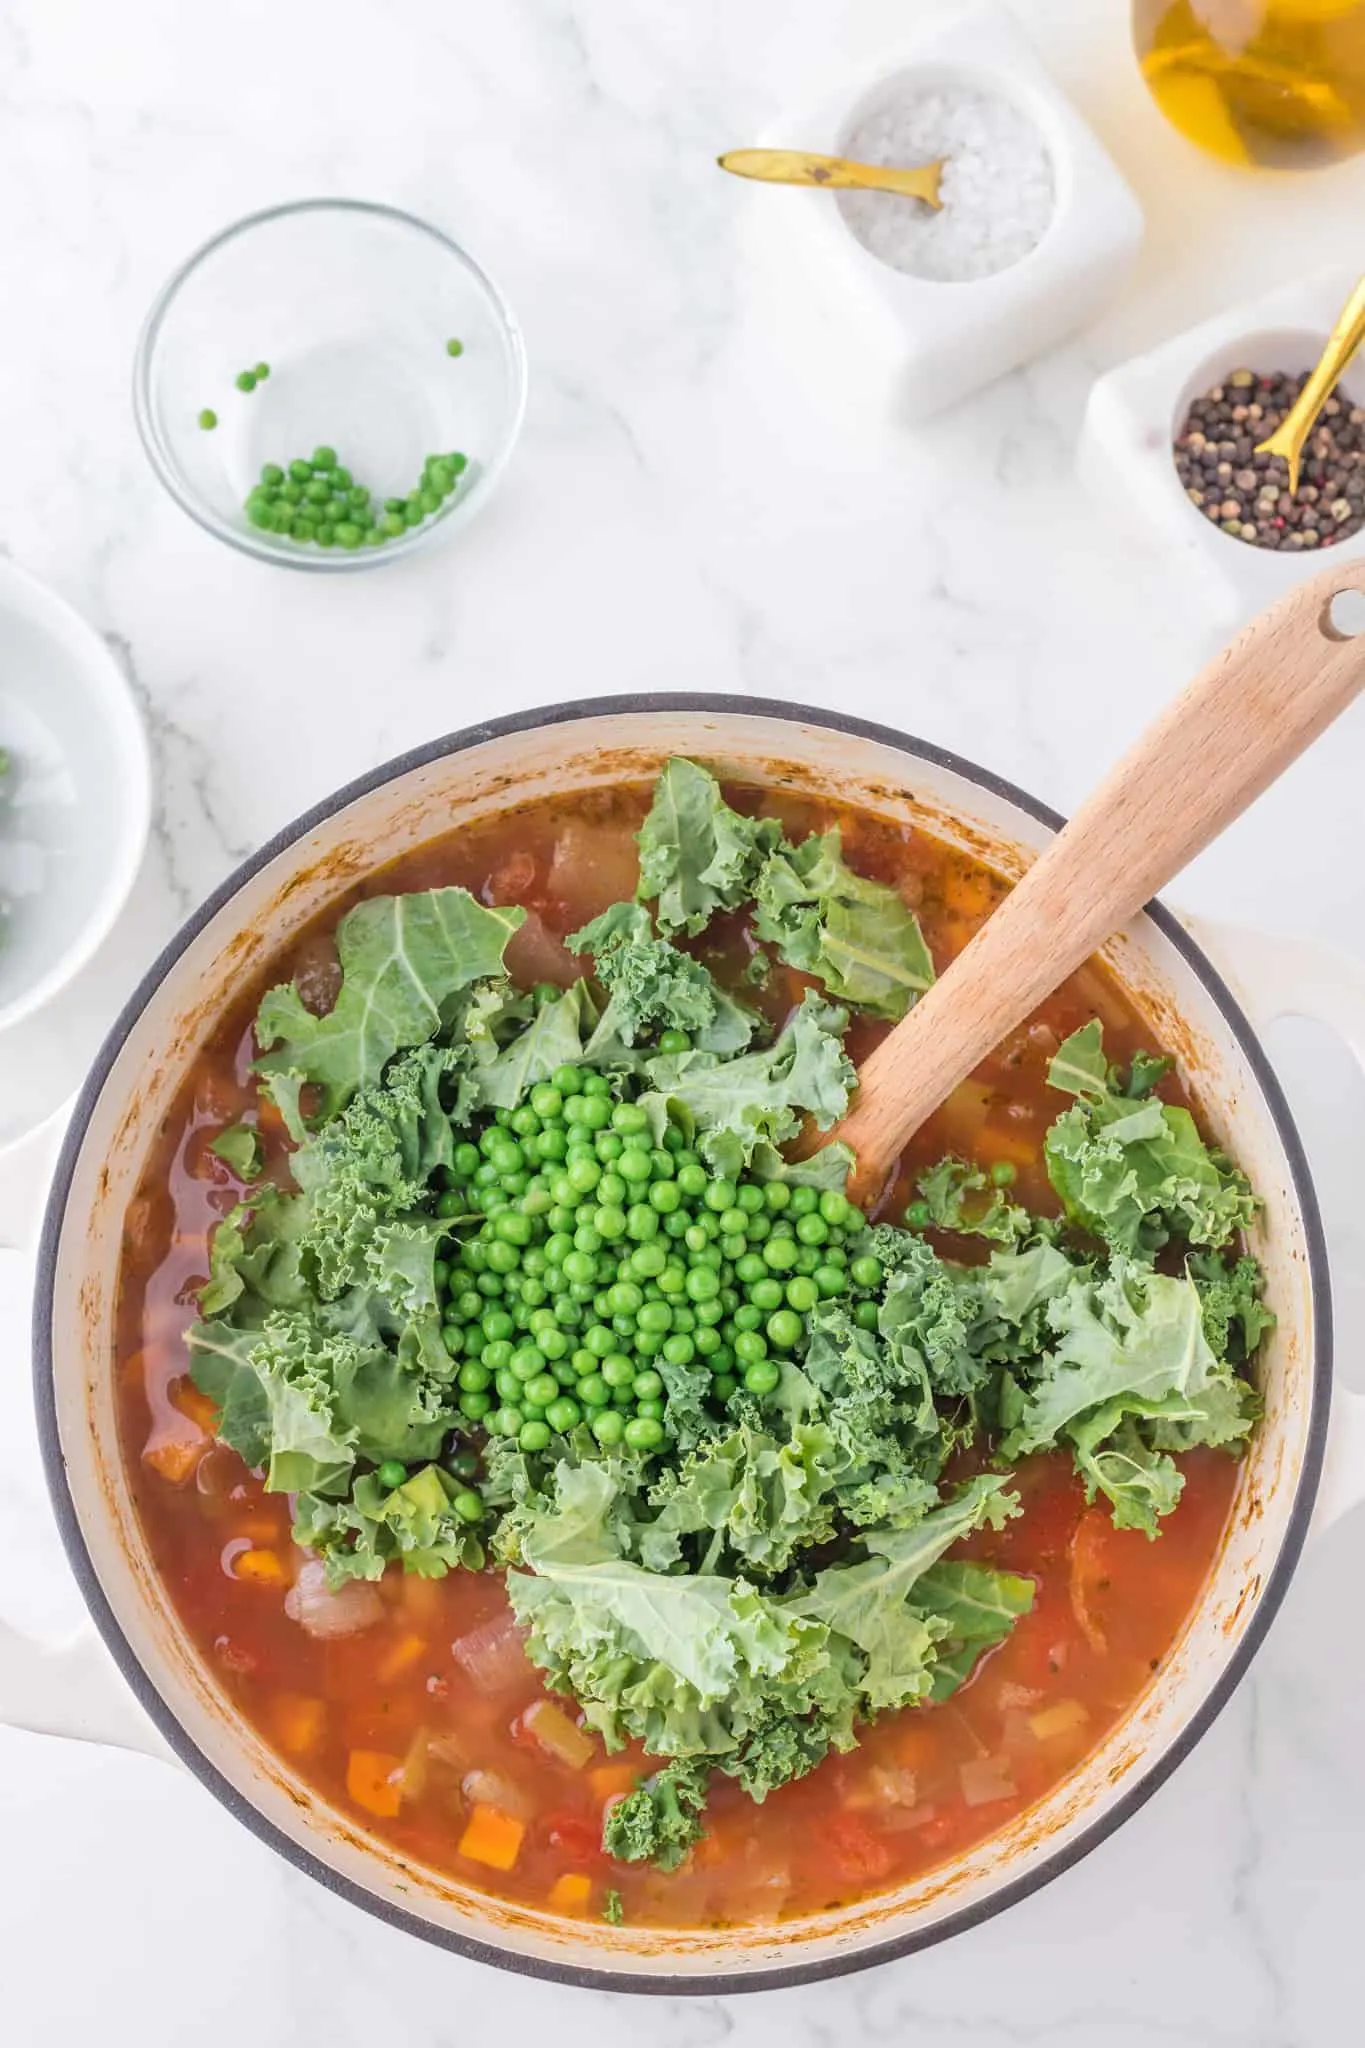 frozen peas and chopped kale added to vegetable barley soup